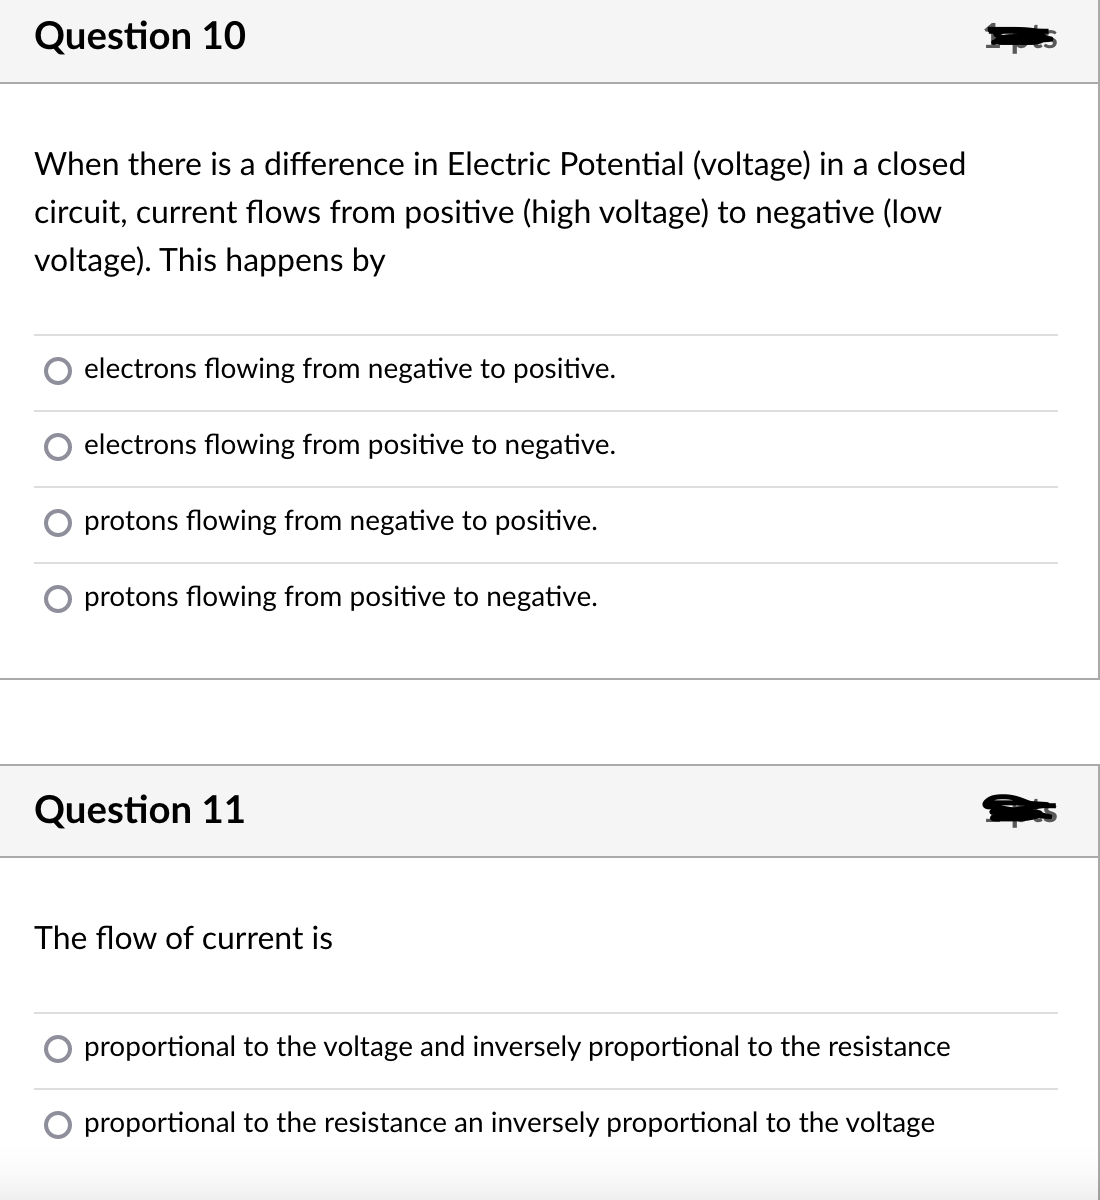 Question 10
When there is a difference in Electric Potential (voltage) in a closed
circuit, current flows from positive (high voltage) to negative (low
voltage). This happens by
electrons flowing from negative to positive.
electrons flowing from positive to negative.
protons flowing from negative to positive.
protons flowing from positive to negative.
Question 11
The flow of current is
proportional to the voltage and inversely proportional to the resistance
proportional to the resistance an inversely proportional to the voltage
